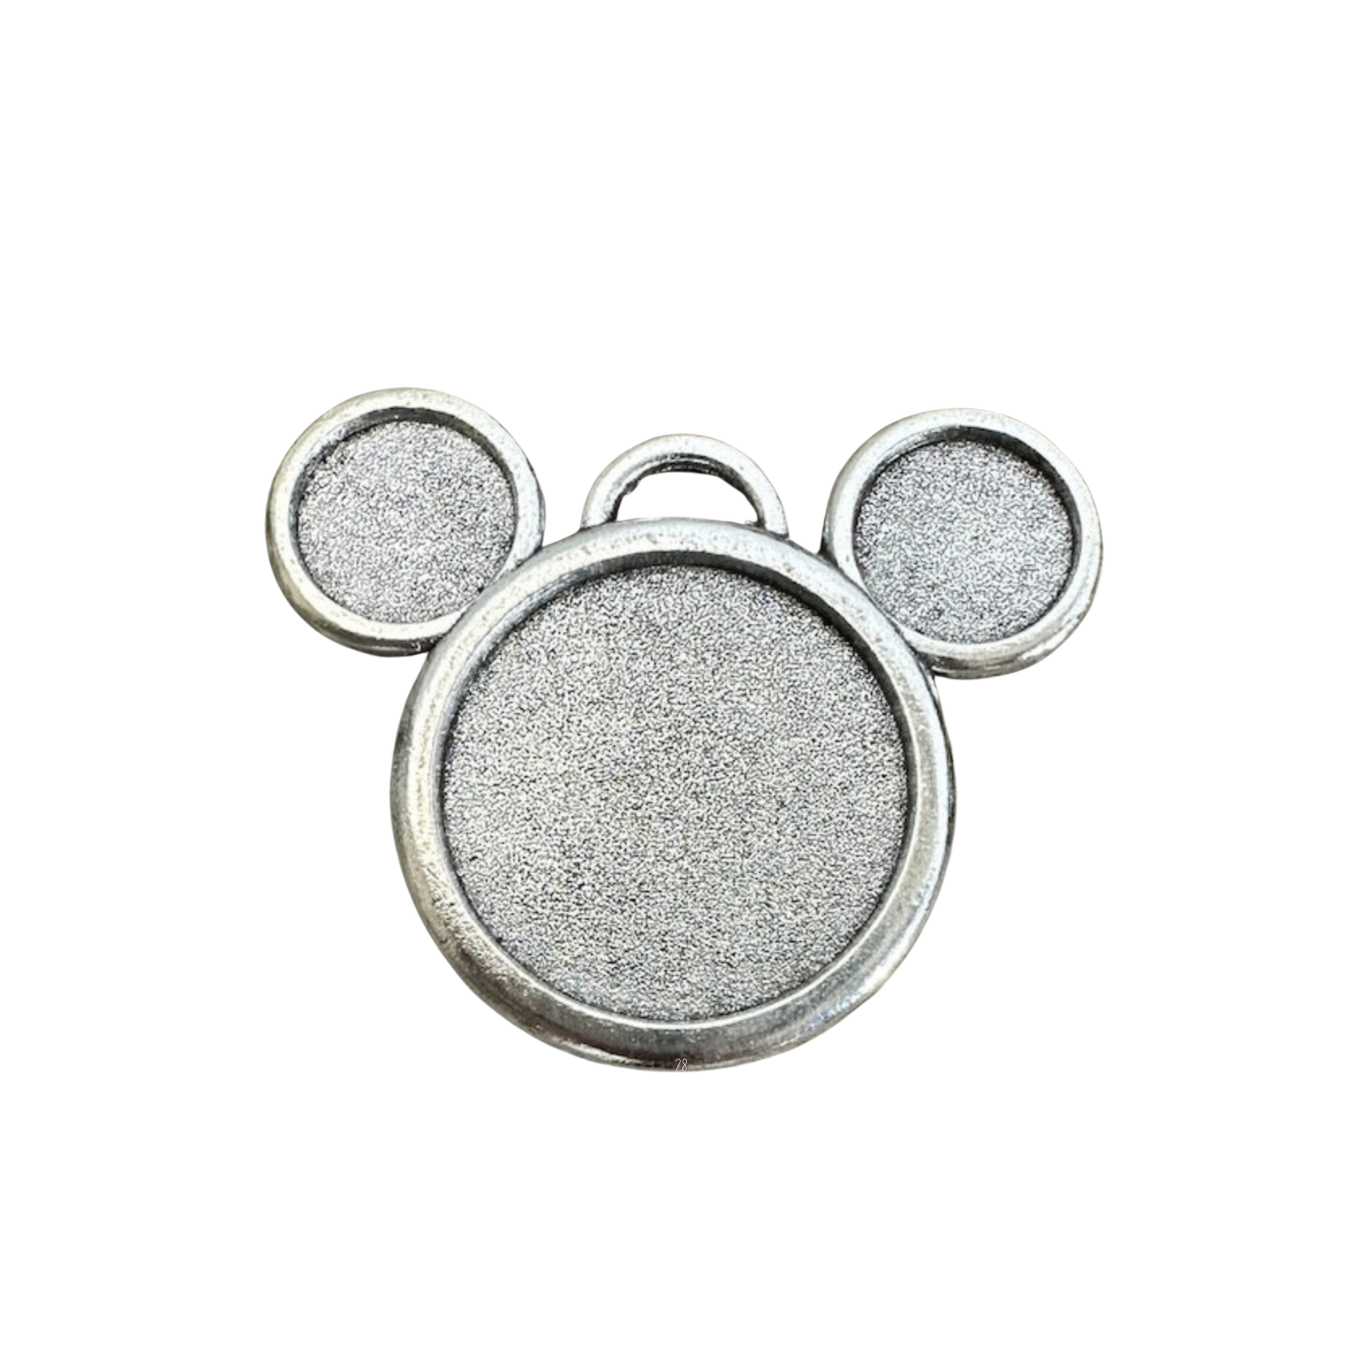 mouse-pendant-setting-silver-mickey-25mm